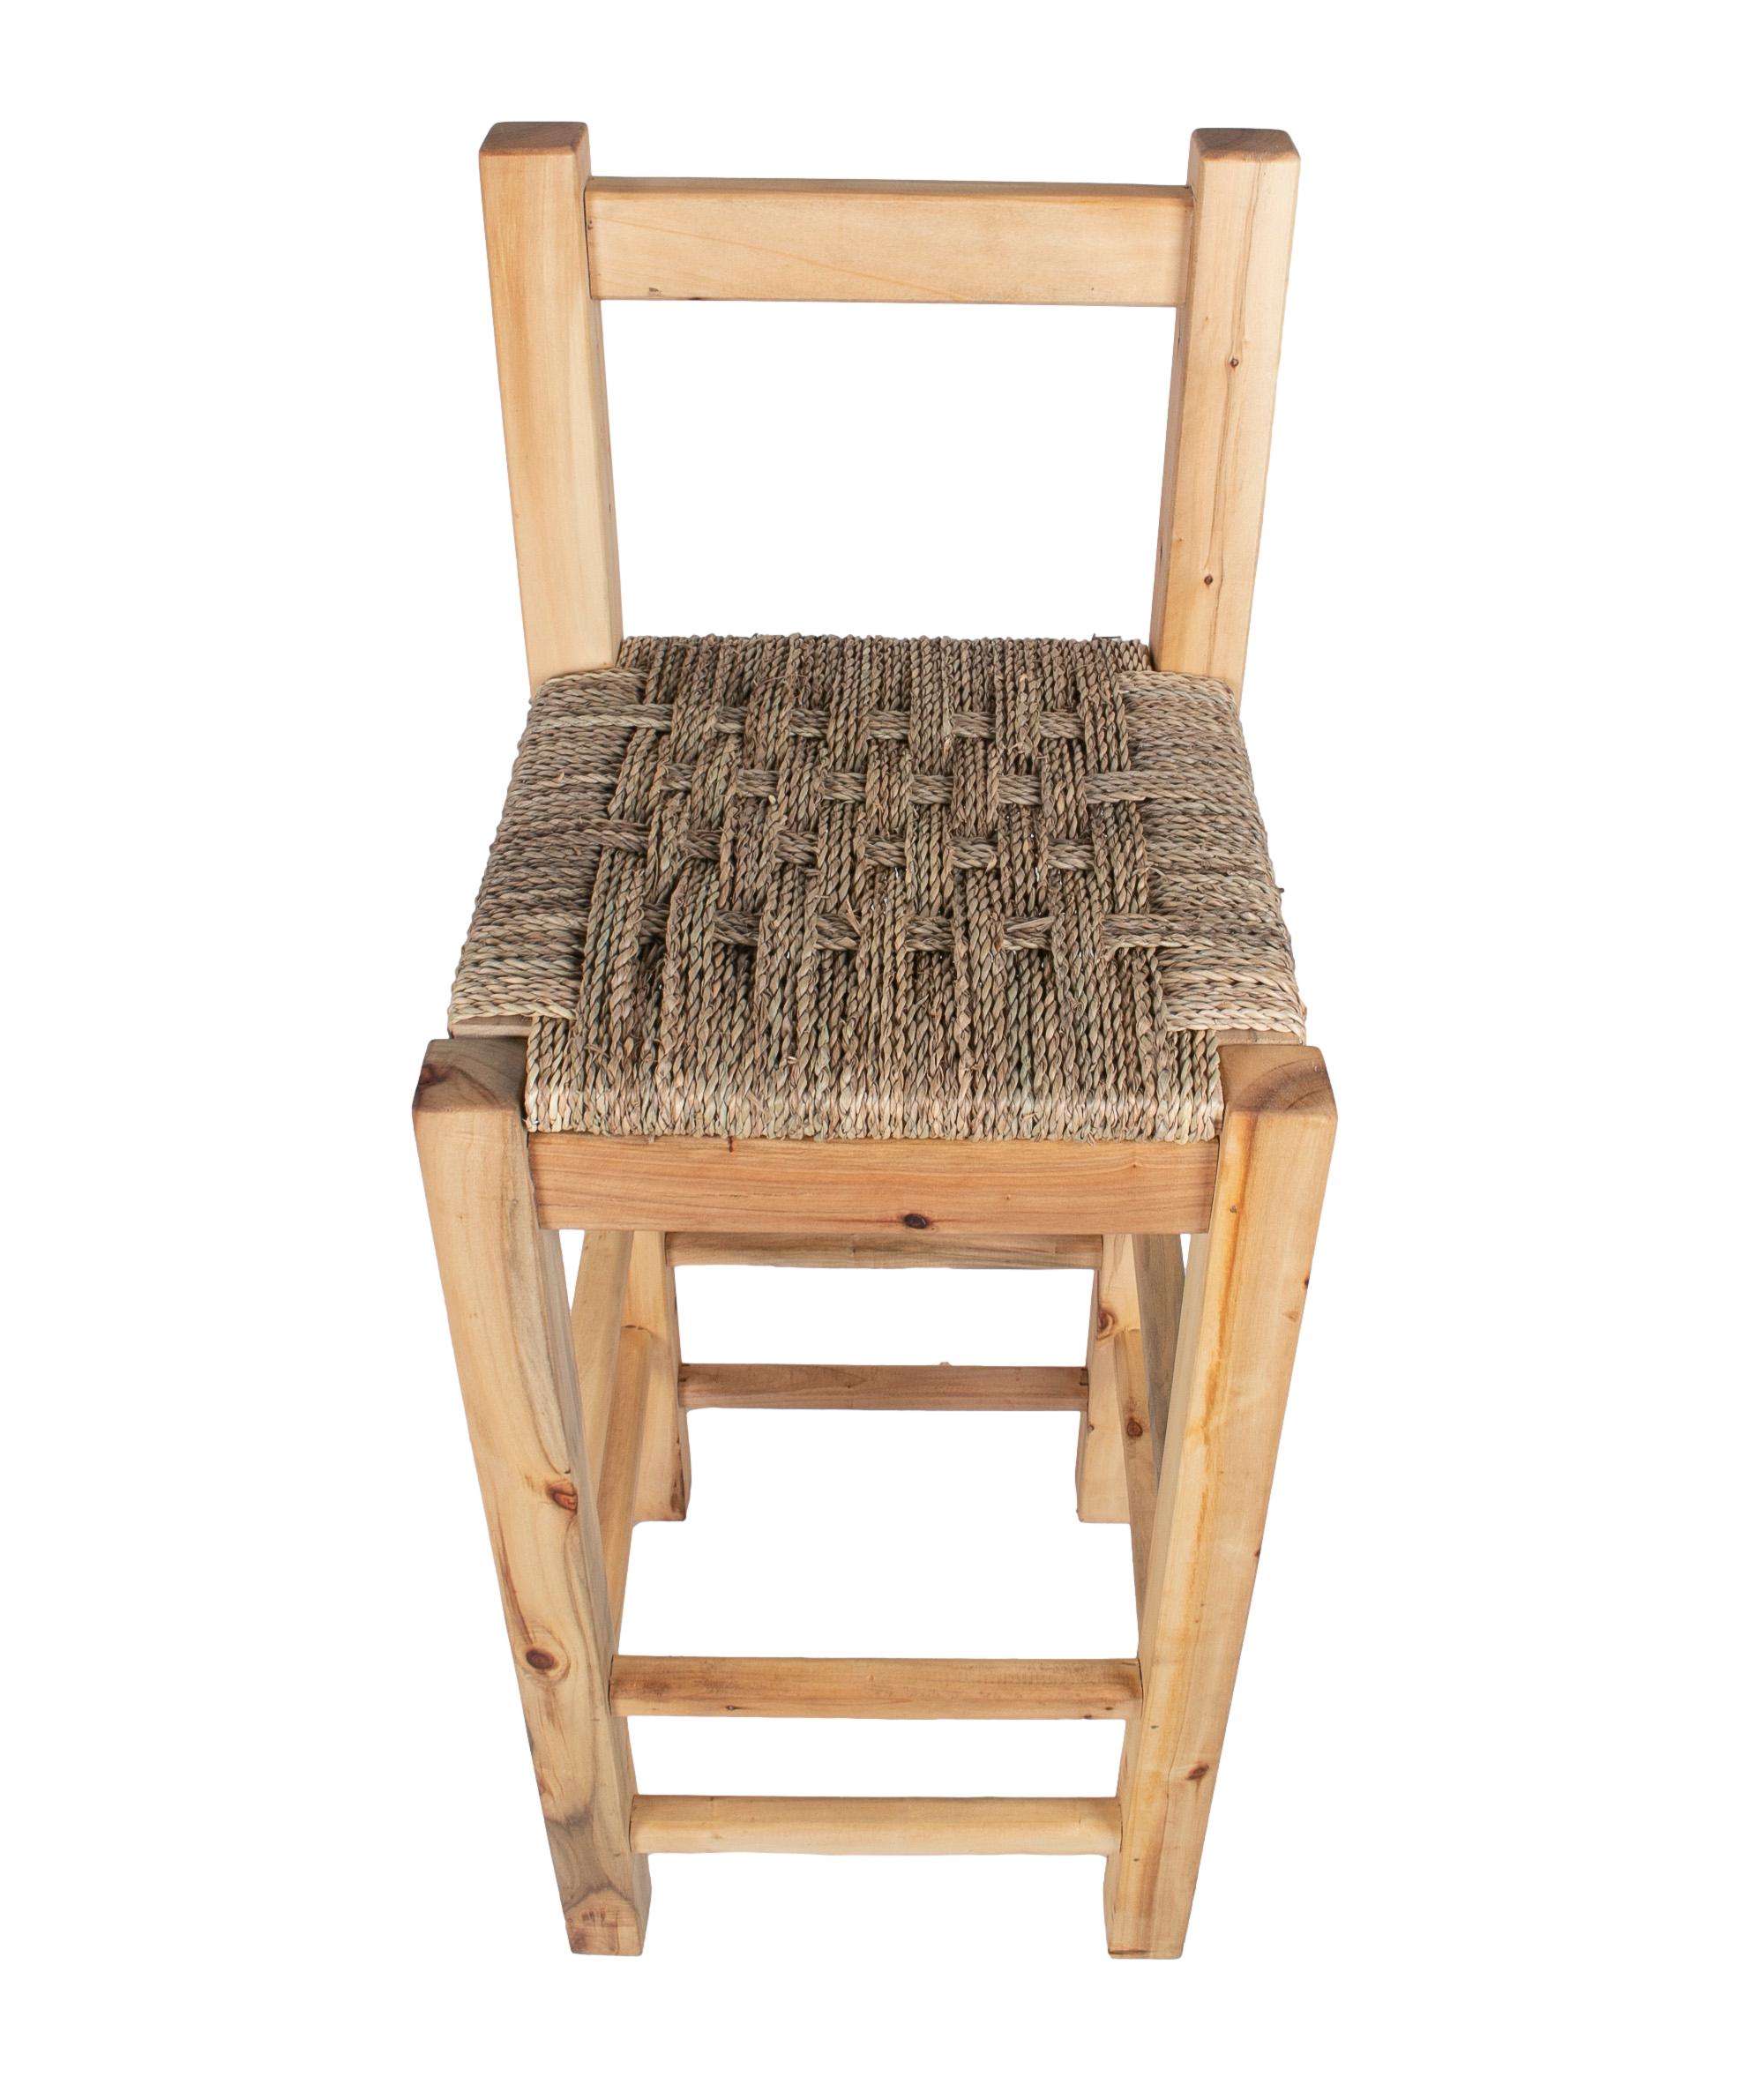 Set of 6 1990s Spanish wooden rope bottomed stools with backrest.